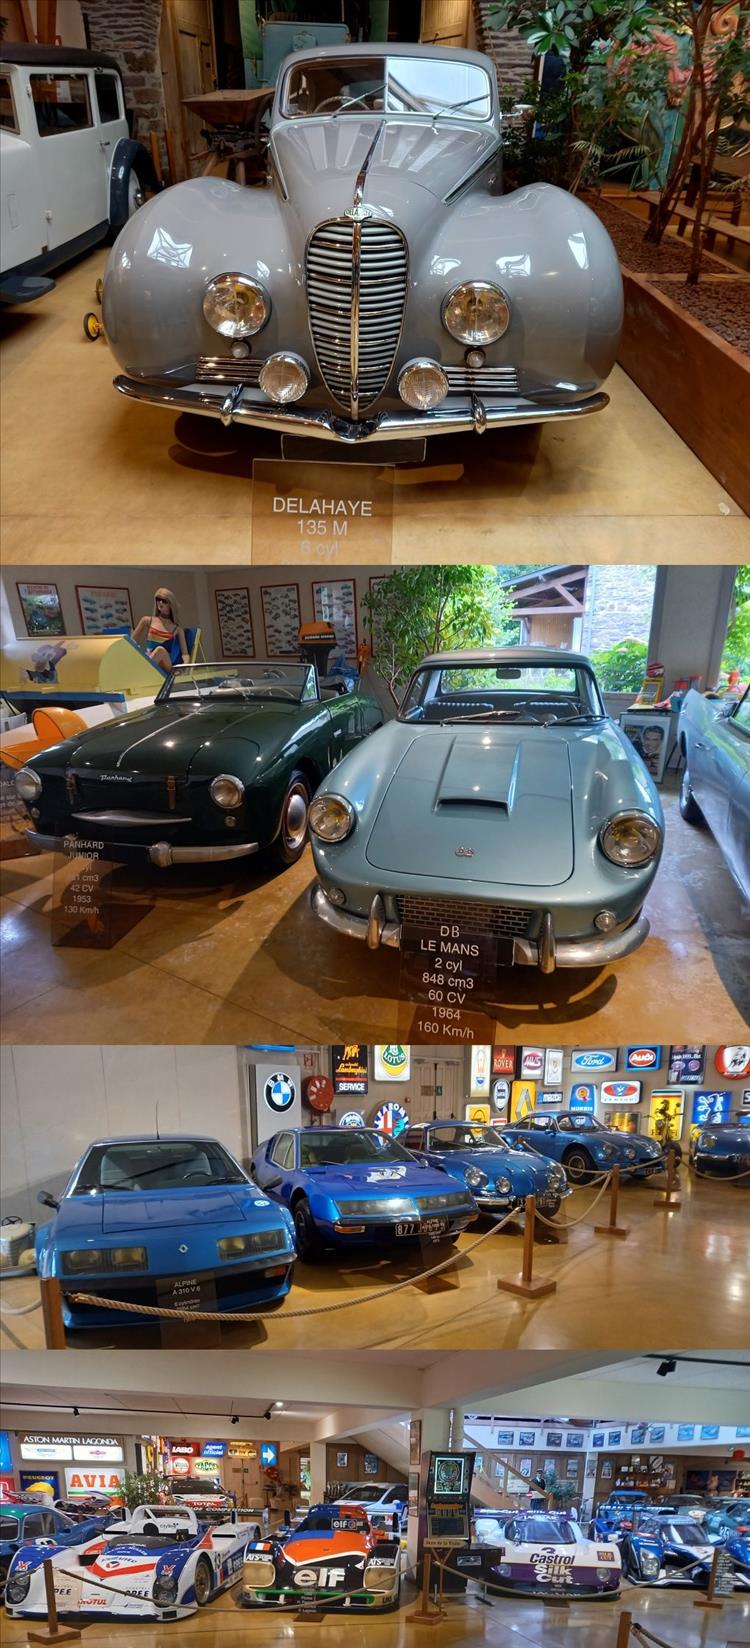 Montage of old cars and racing cars from the museum